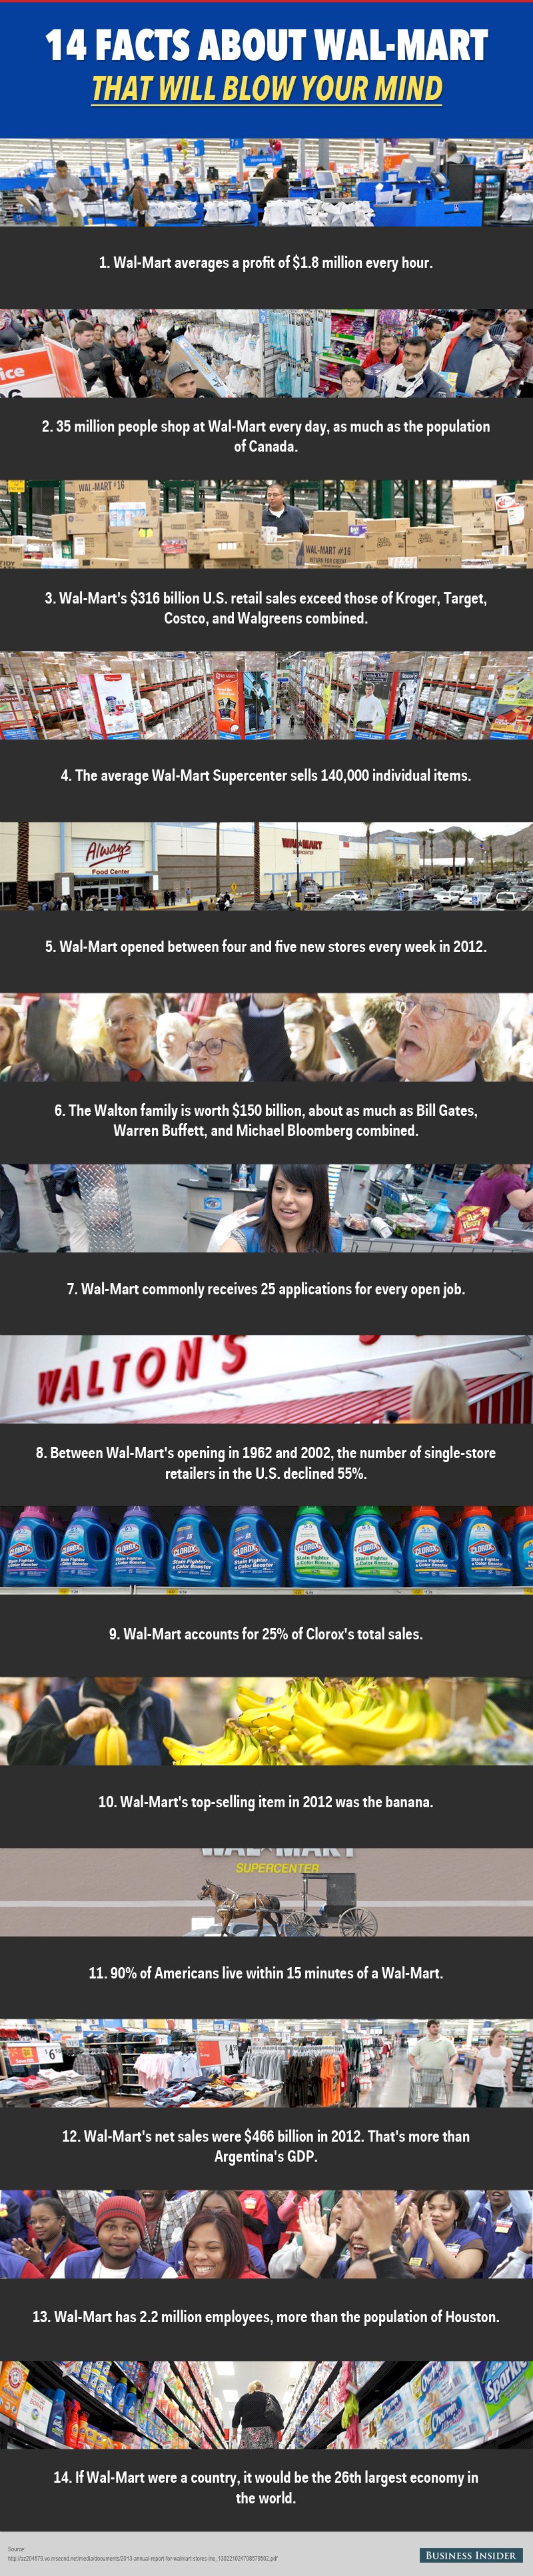 14 Facts About Wal-Mart Retailer That Will Blow Your Mind and Heart